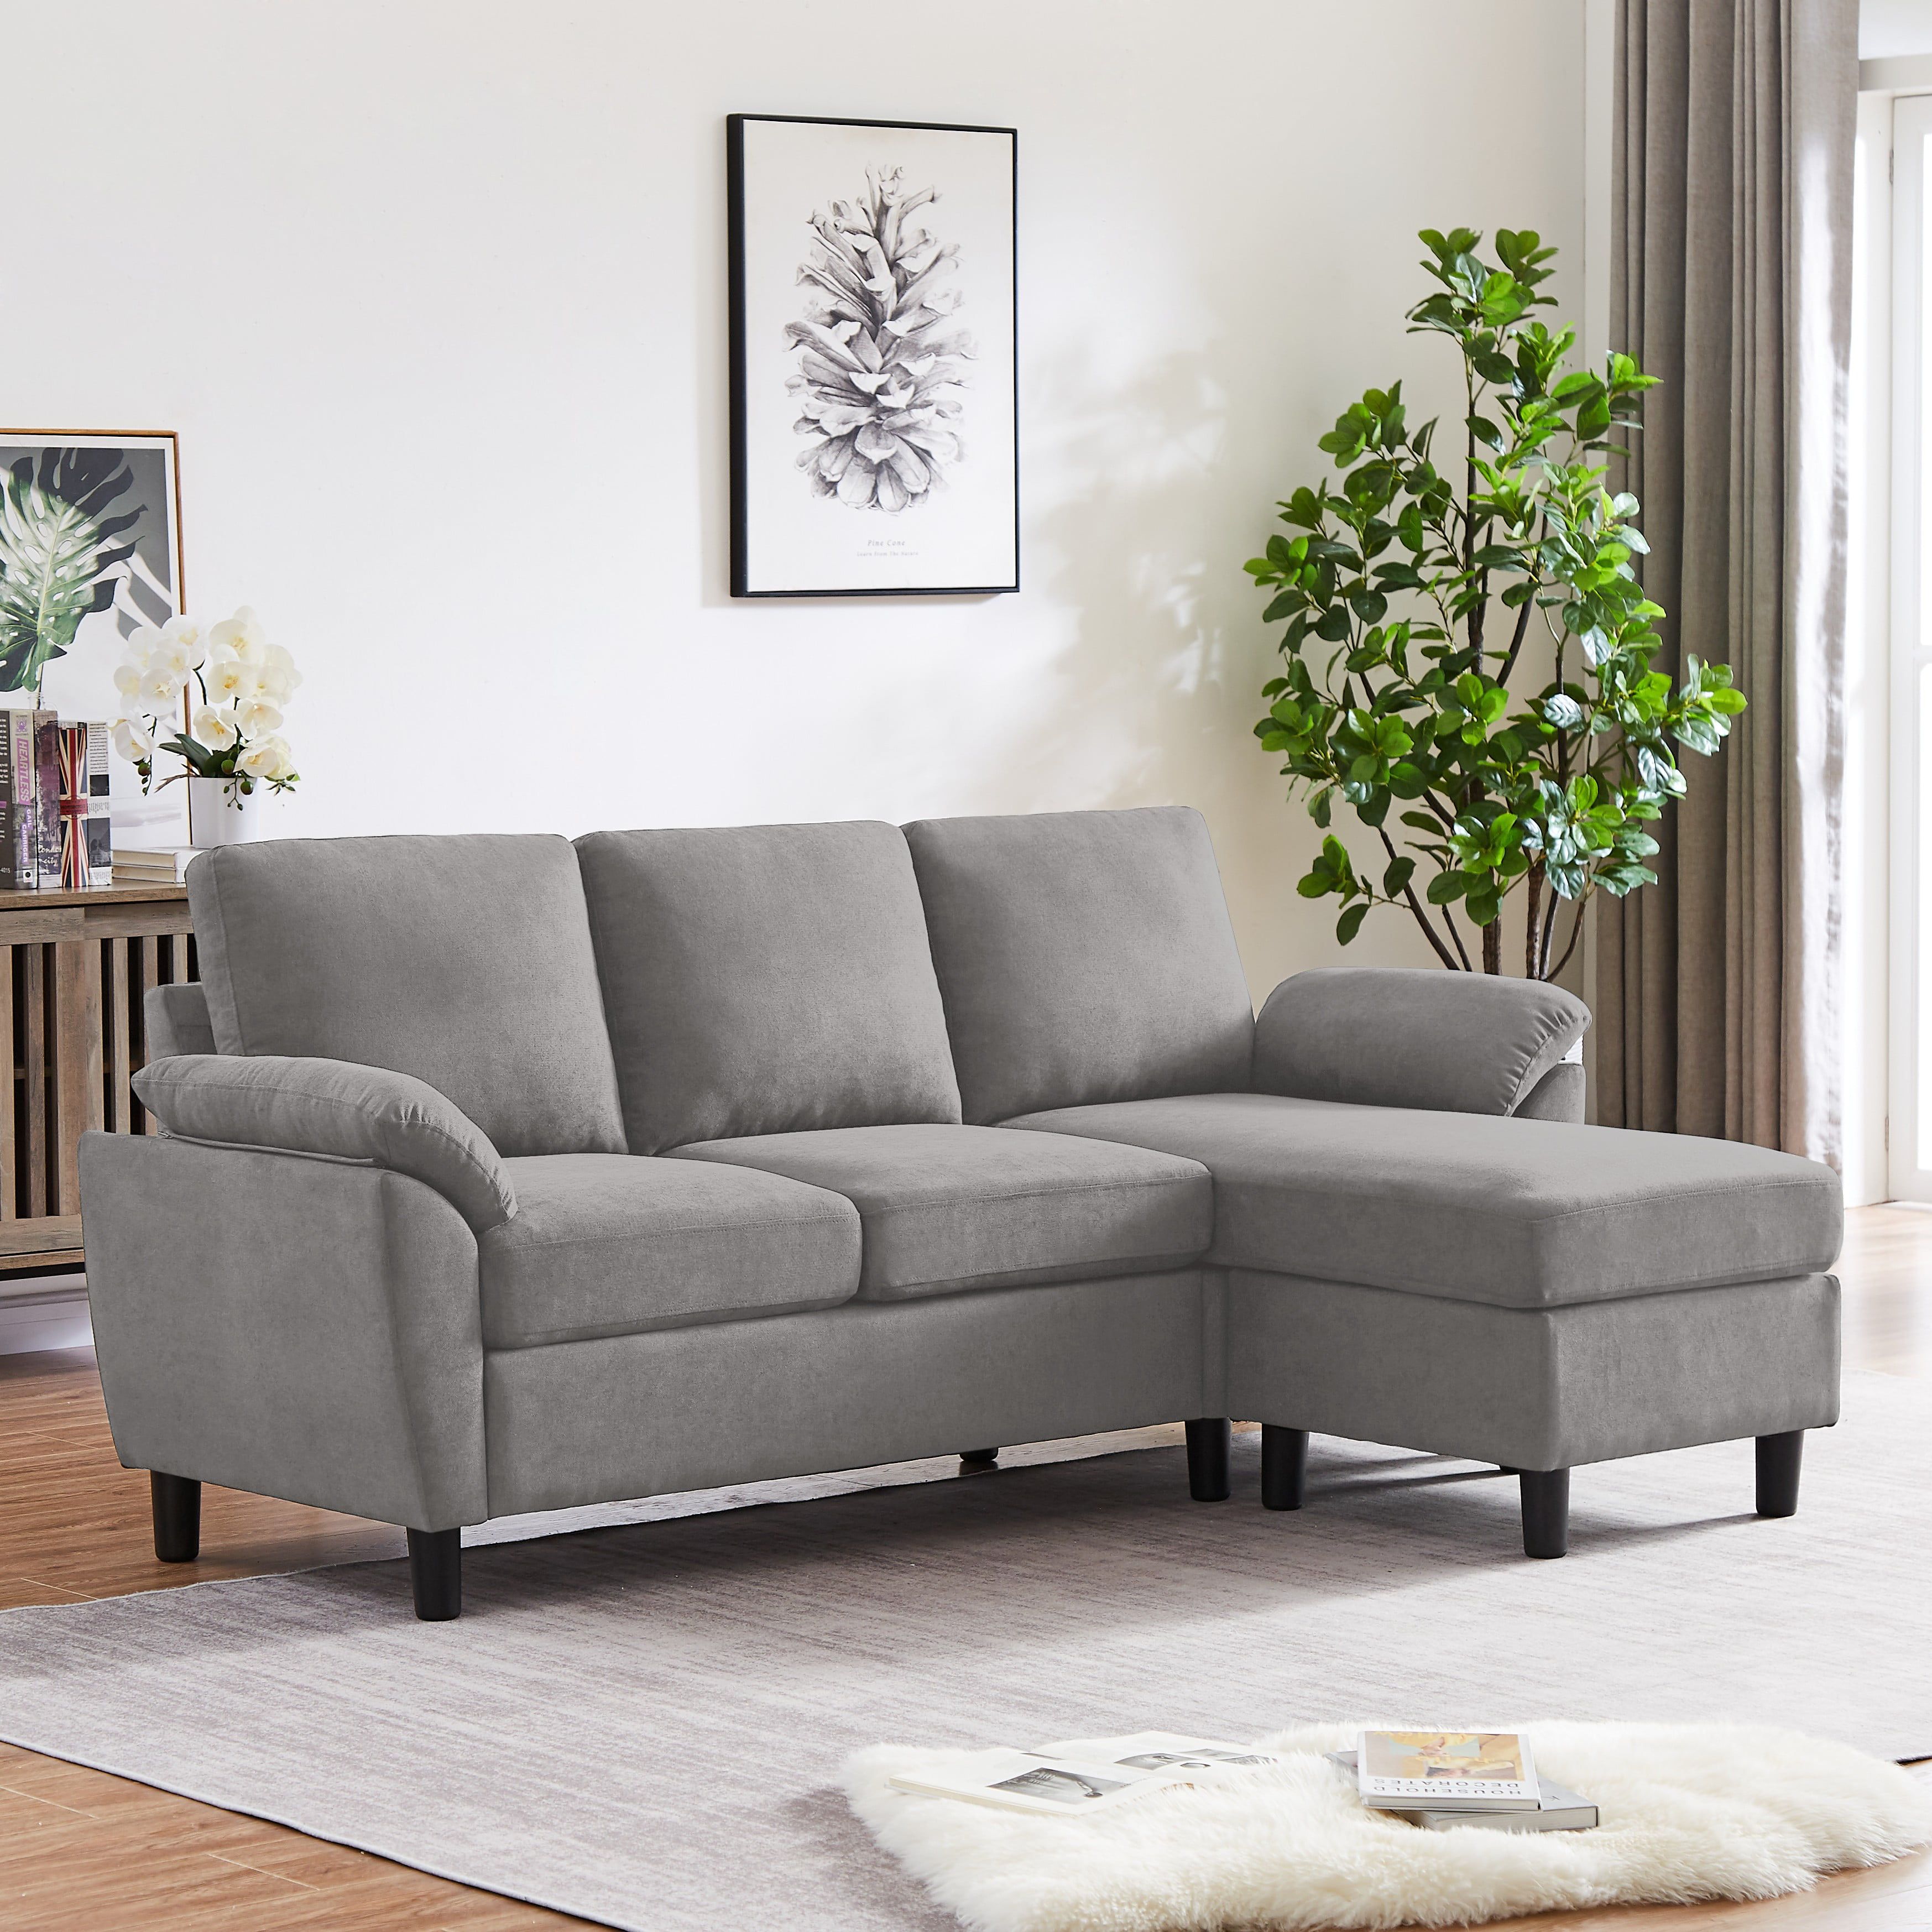 Jarenie Modern Fabric L Shapped Sofa Sectional Couches For Living Room Convertible  Sofa With Matching Chaise For Office, Apartment, Studio – Walmart Pertaining To Convertible Sofas With Matching Chaise (View 2 of 15)